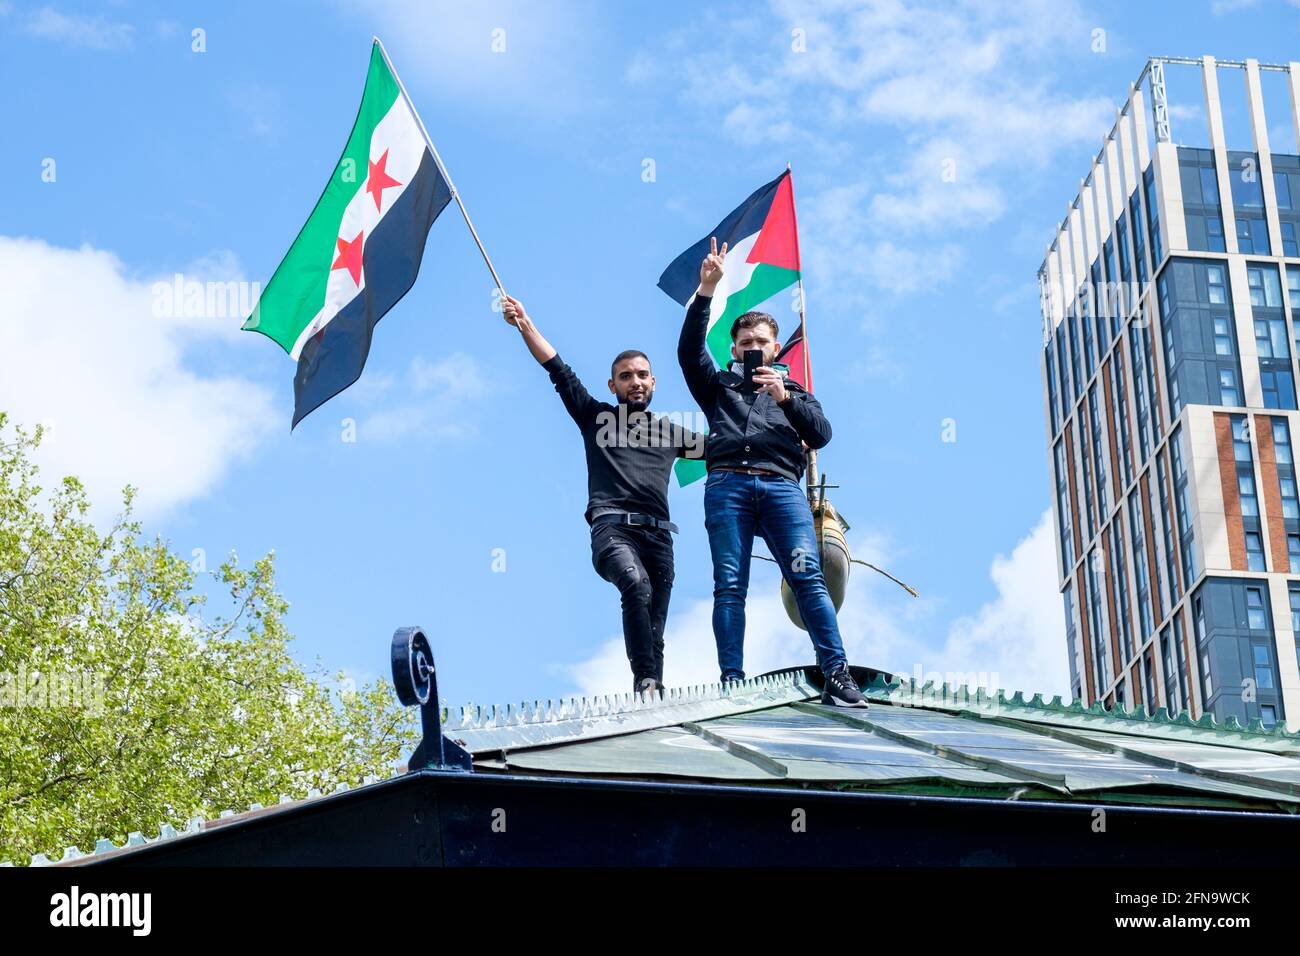 Bristol, UK. 15th May, 2021. Pro-Palestinian supporters are pictured waving a flag on top of a band stand in Castle Park as Pro-Palestinian supporters listen to speeches before a Pro-Palestinian protest march through Bristol. The protest march and rally was held to allow people to show their support and solidarity with the Palestinian people after 73 Years of Nakba and to protest about Israel's recent actions in Gaza. Credit: Lynchpics/Alamy Live News Stock Photo